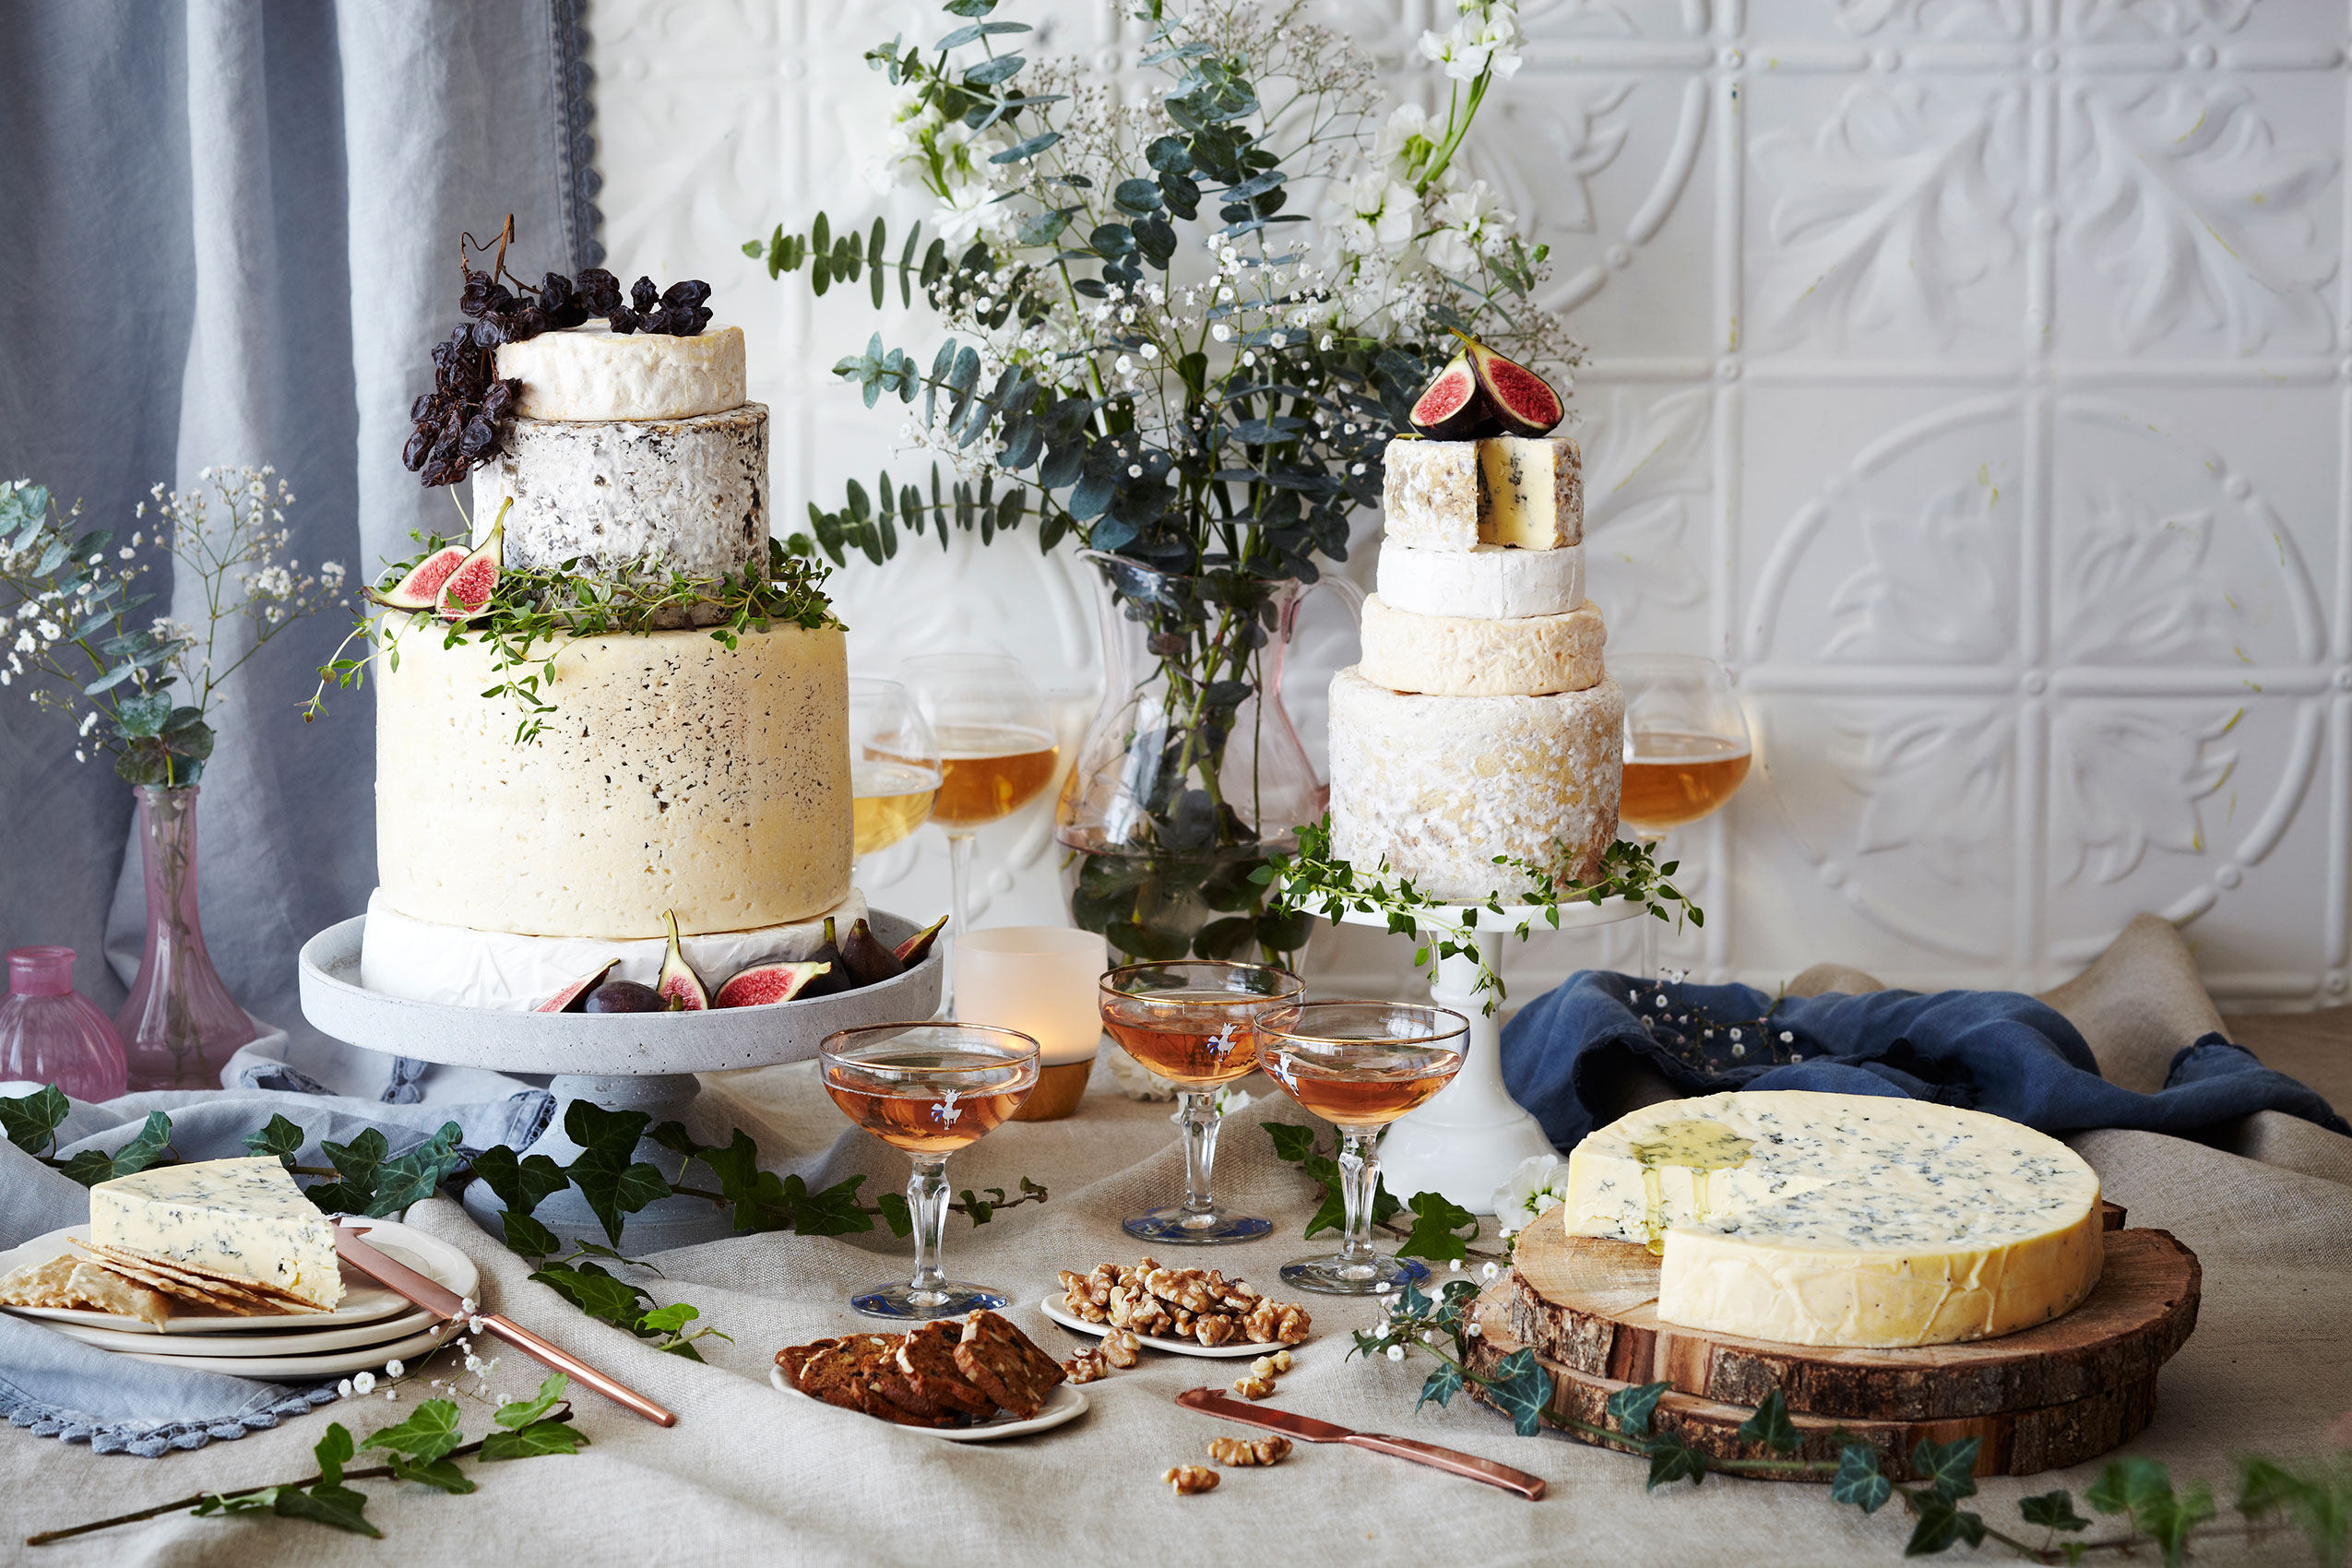 Kapiti Cheese Cakes with Fresh Fig & Walnuts • Advertising & Editorial Food Photography